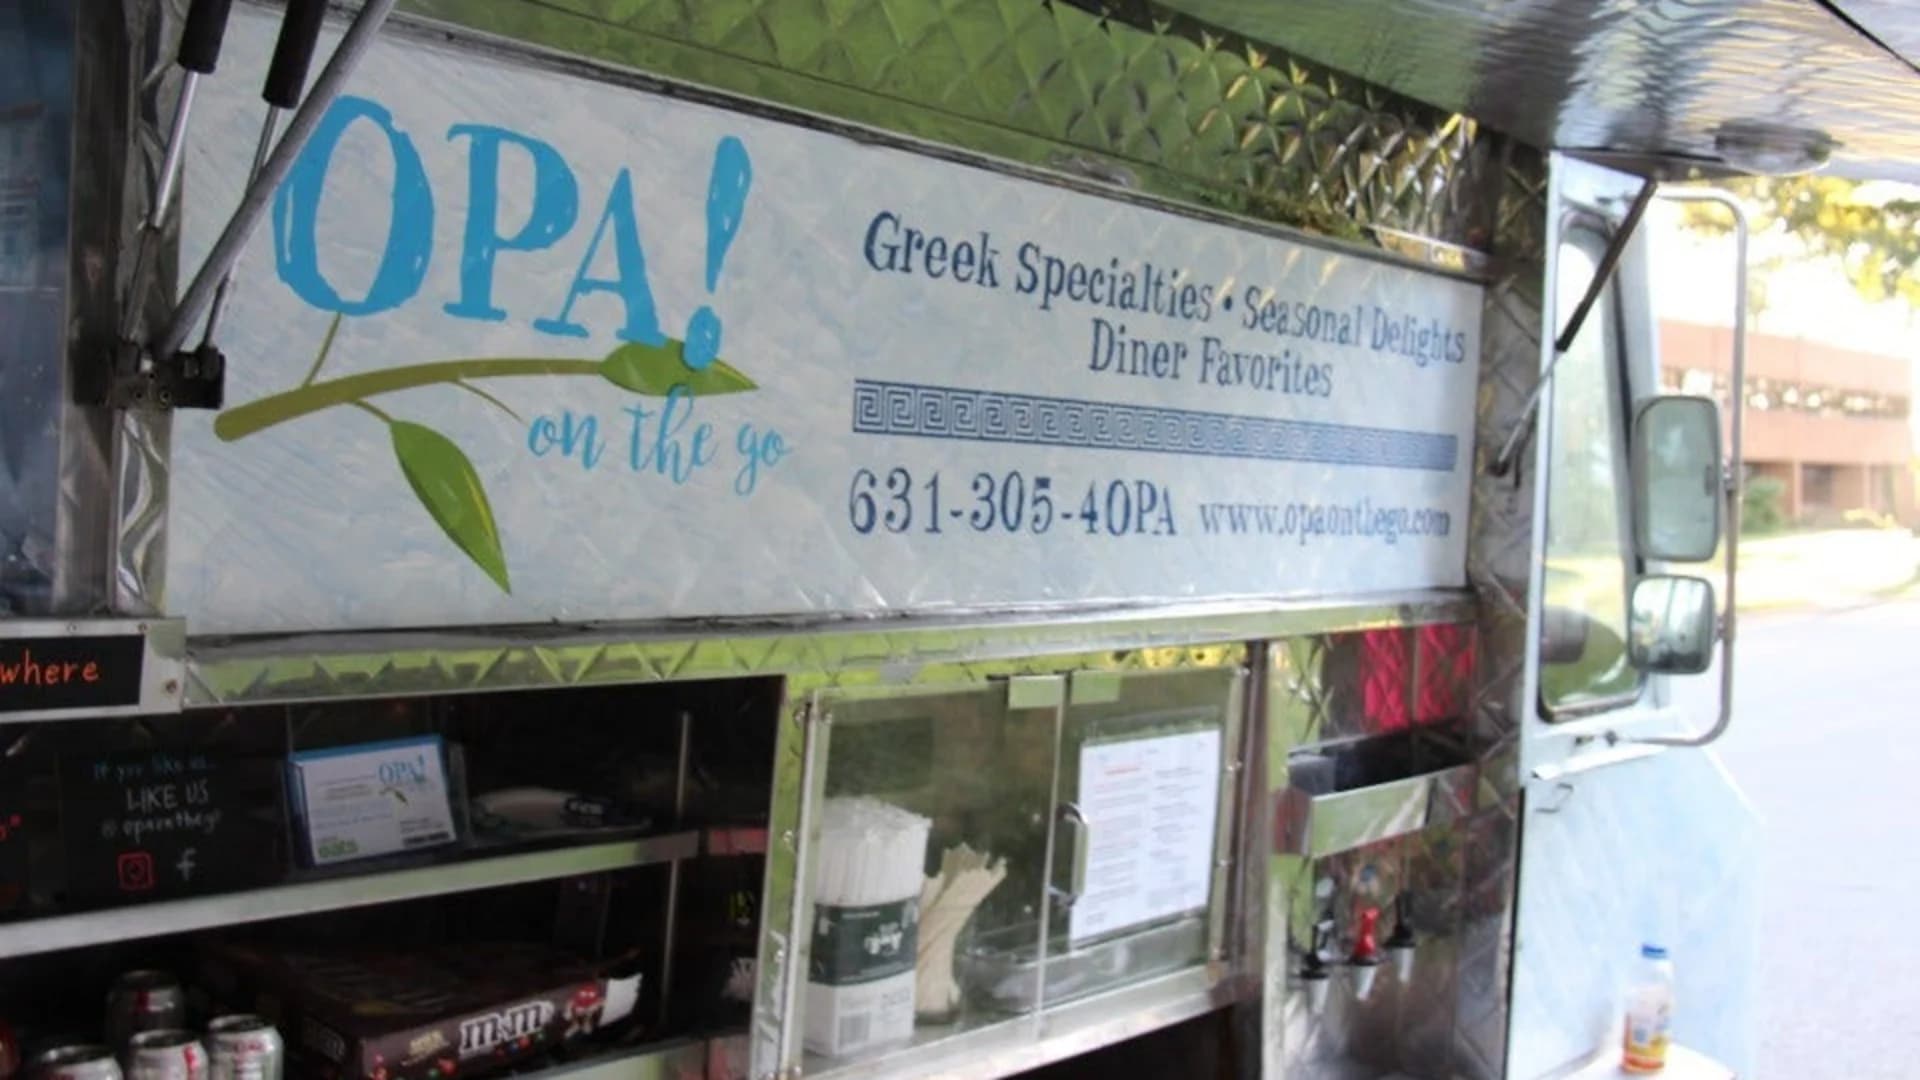 Food Truck Friday: Opa On the Go